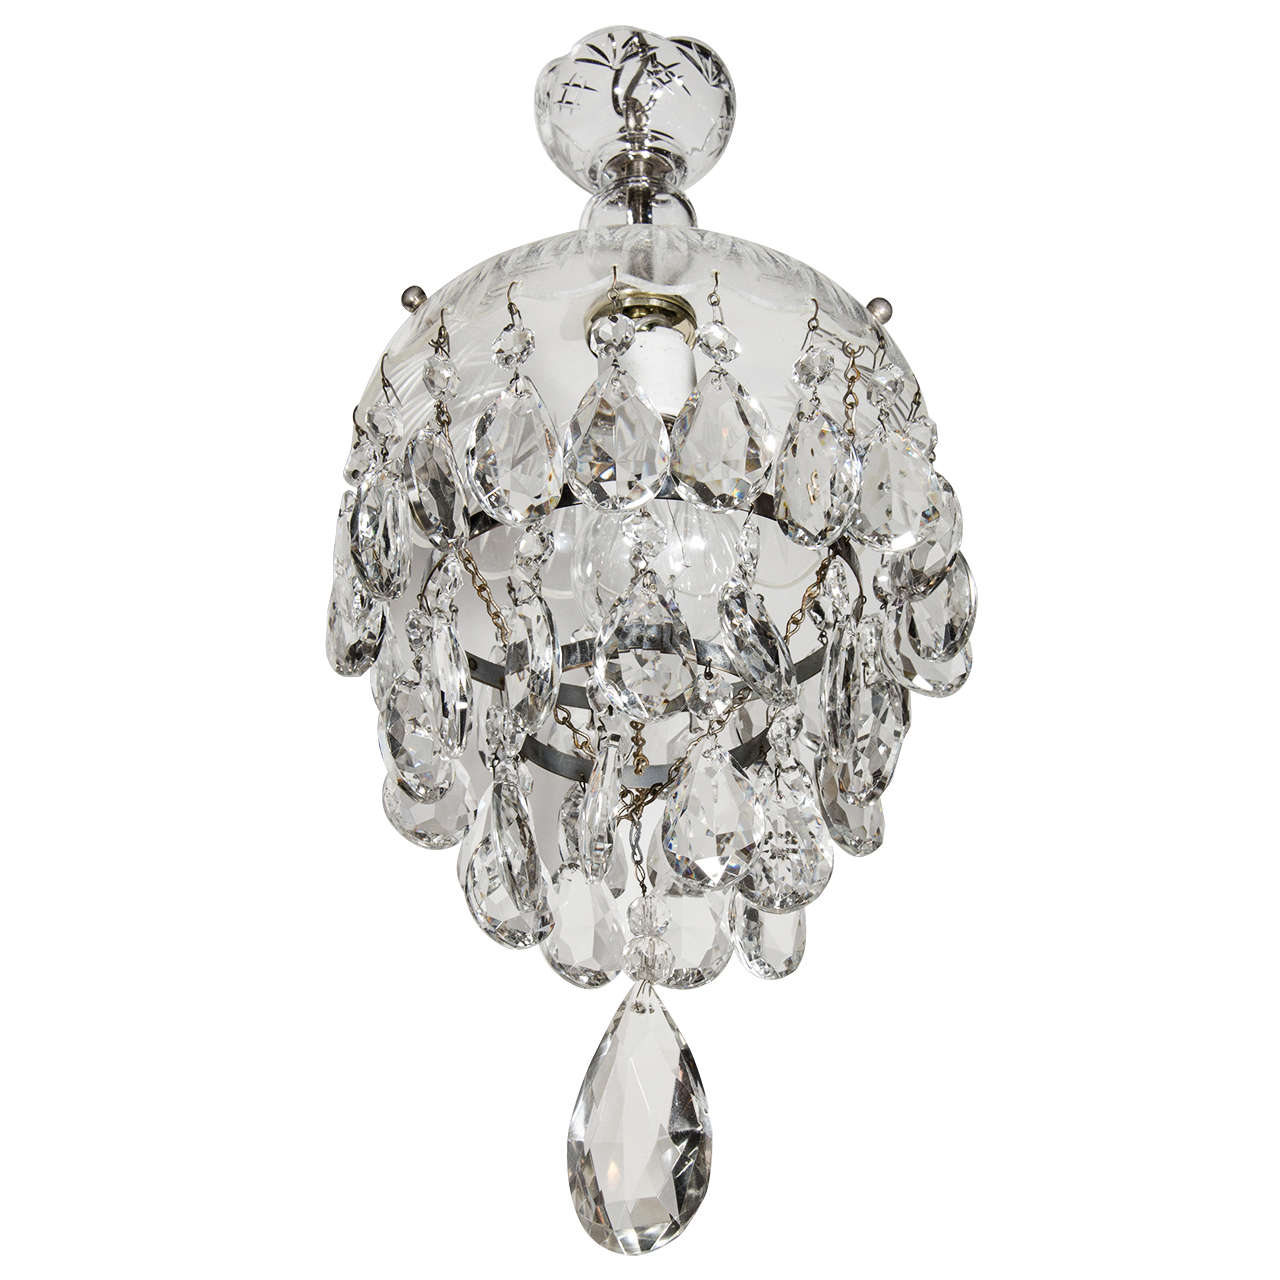 1940s Hollywood Crystal Chandelier with Cut Crystal Pendants